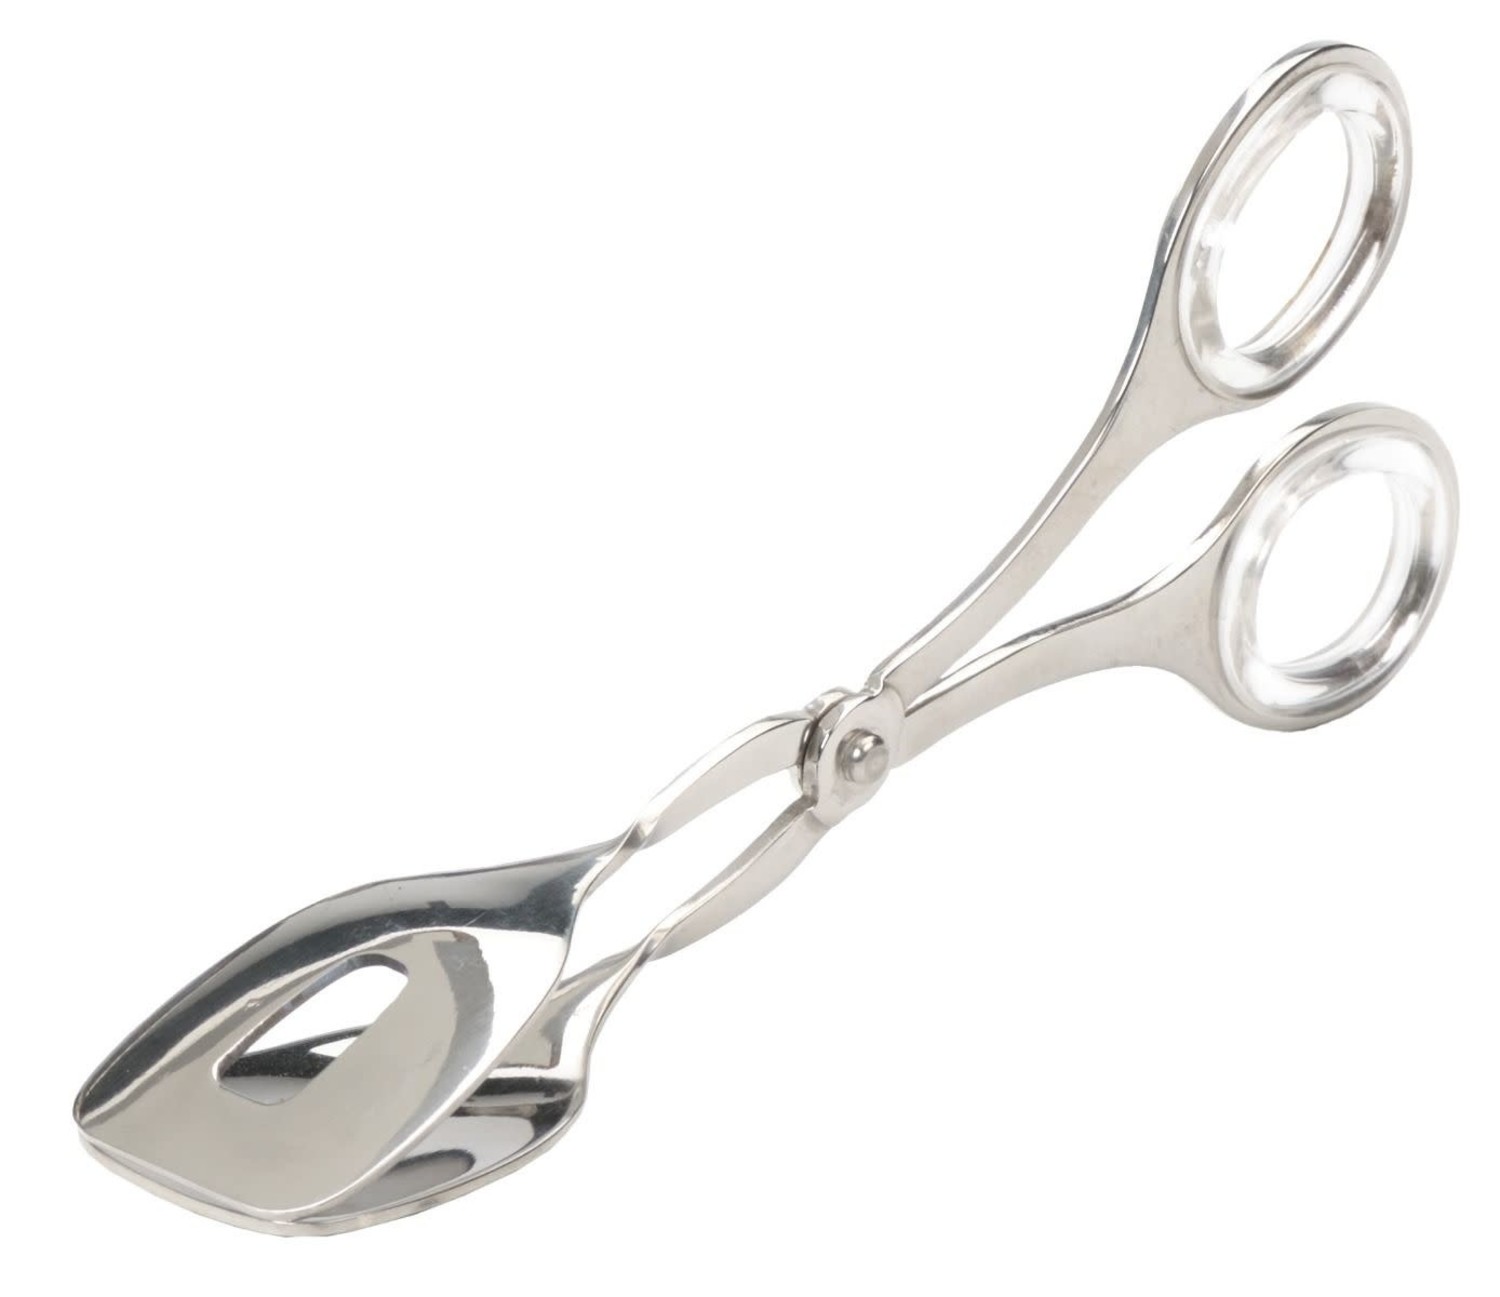 RSVP Cocktail Ice Tongs, 1 - Fry's Food Stores